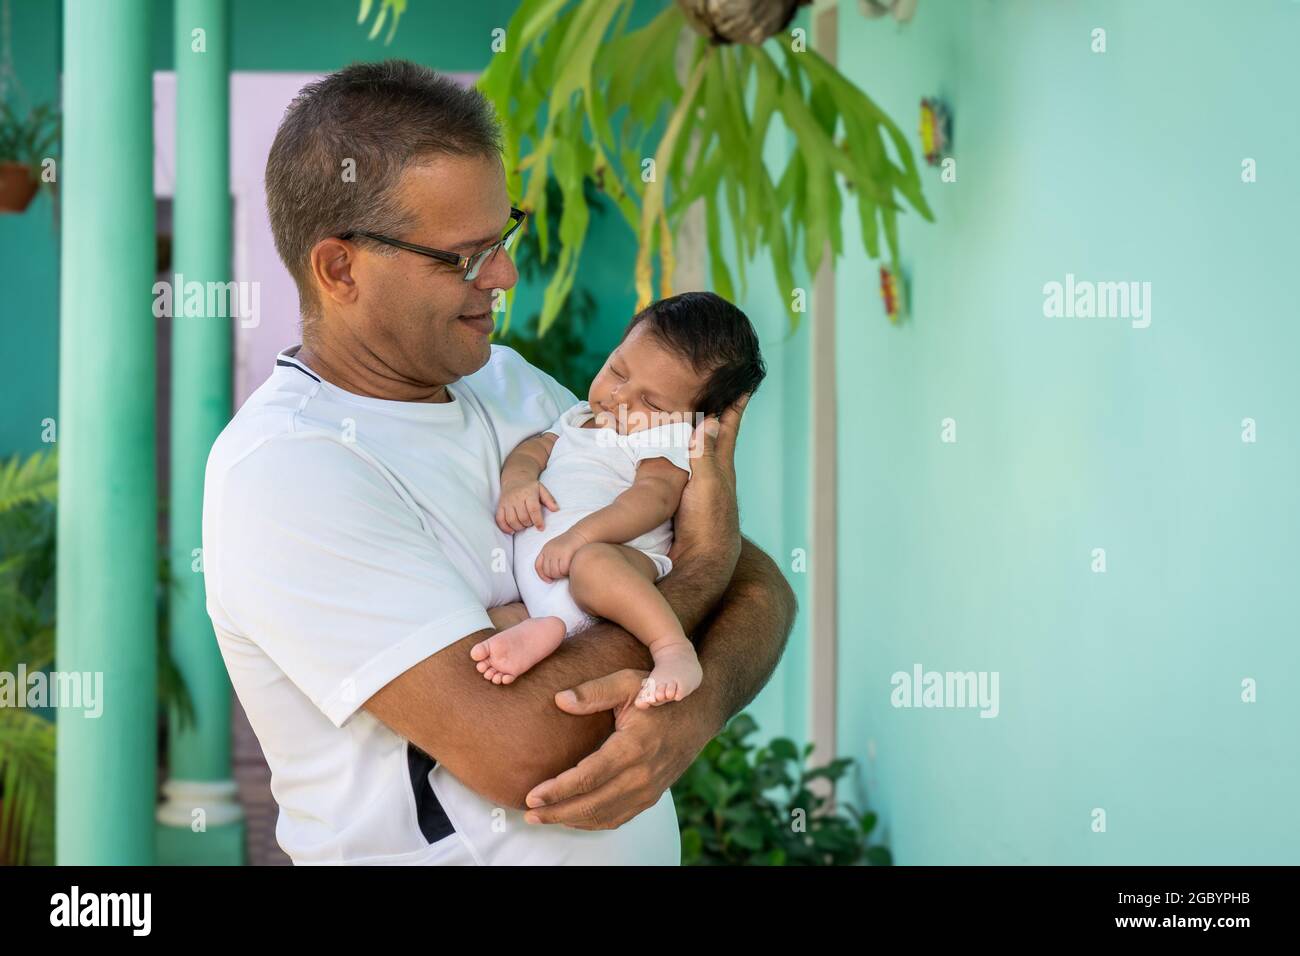 Photo of a baby in the arms of a man Stock Photo